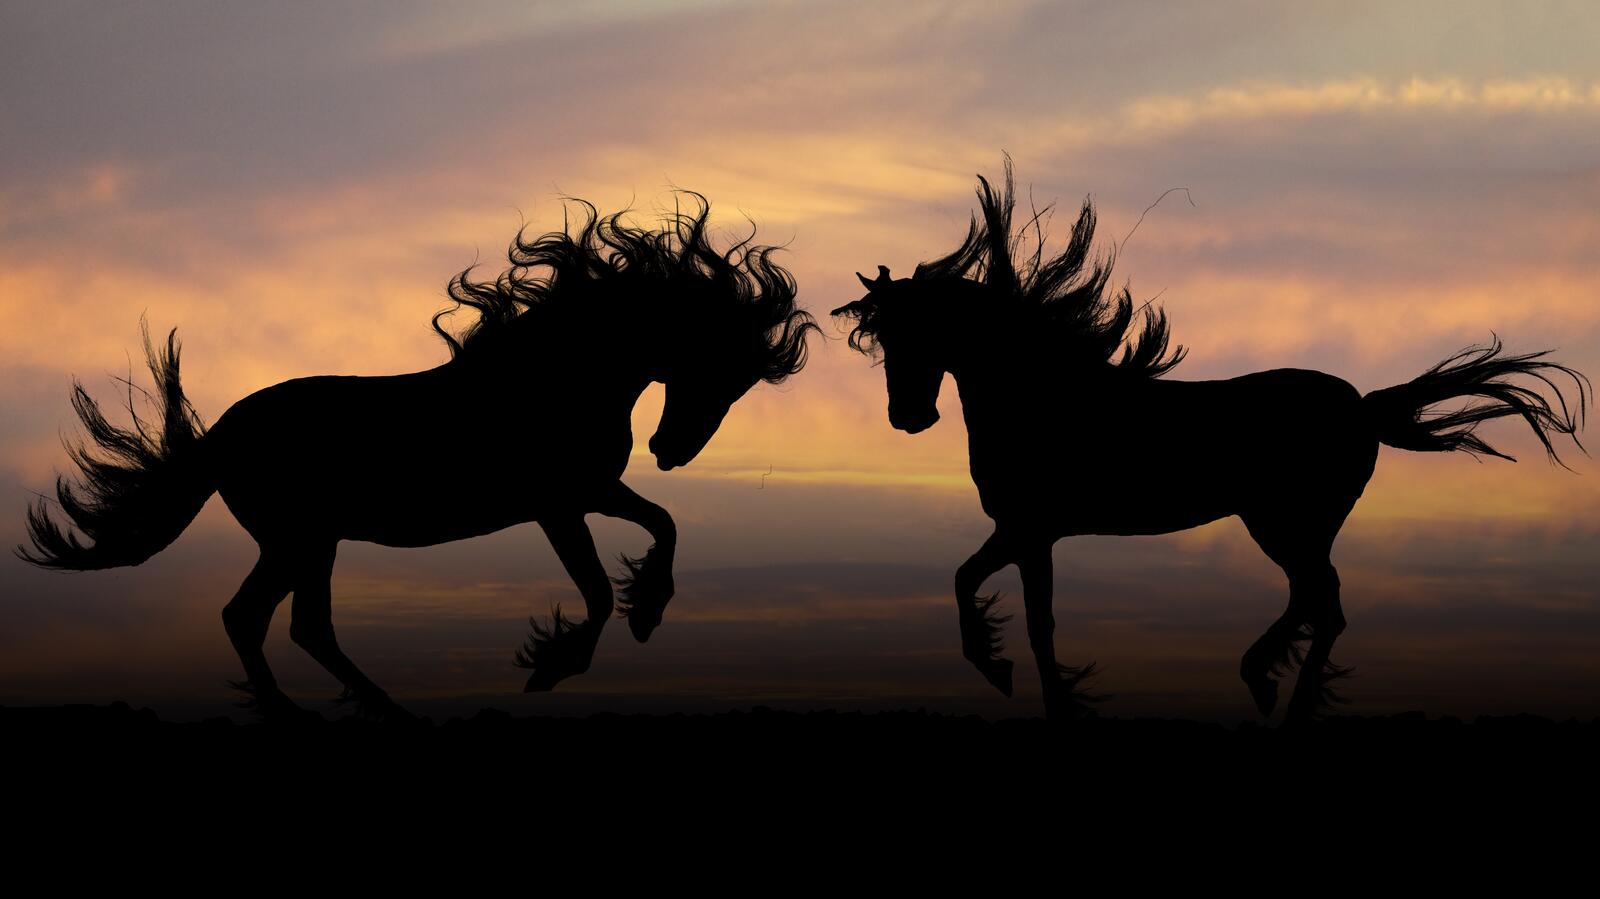 Free photo The silhouette of two horses at sunset.